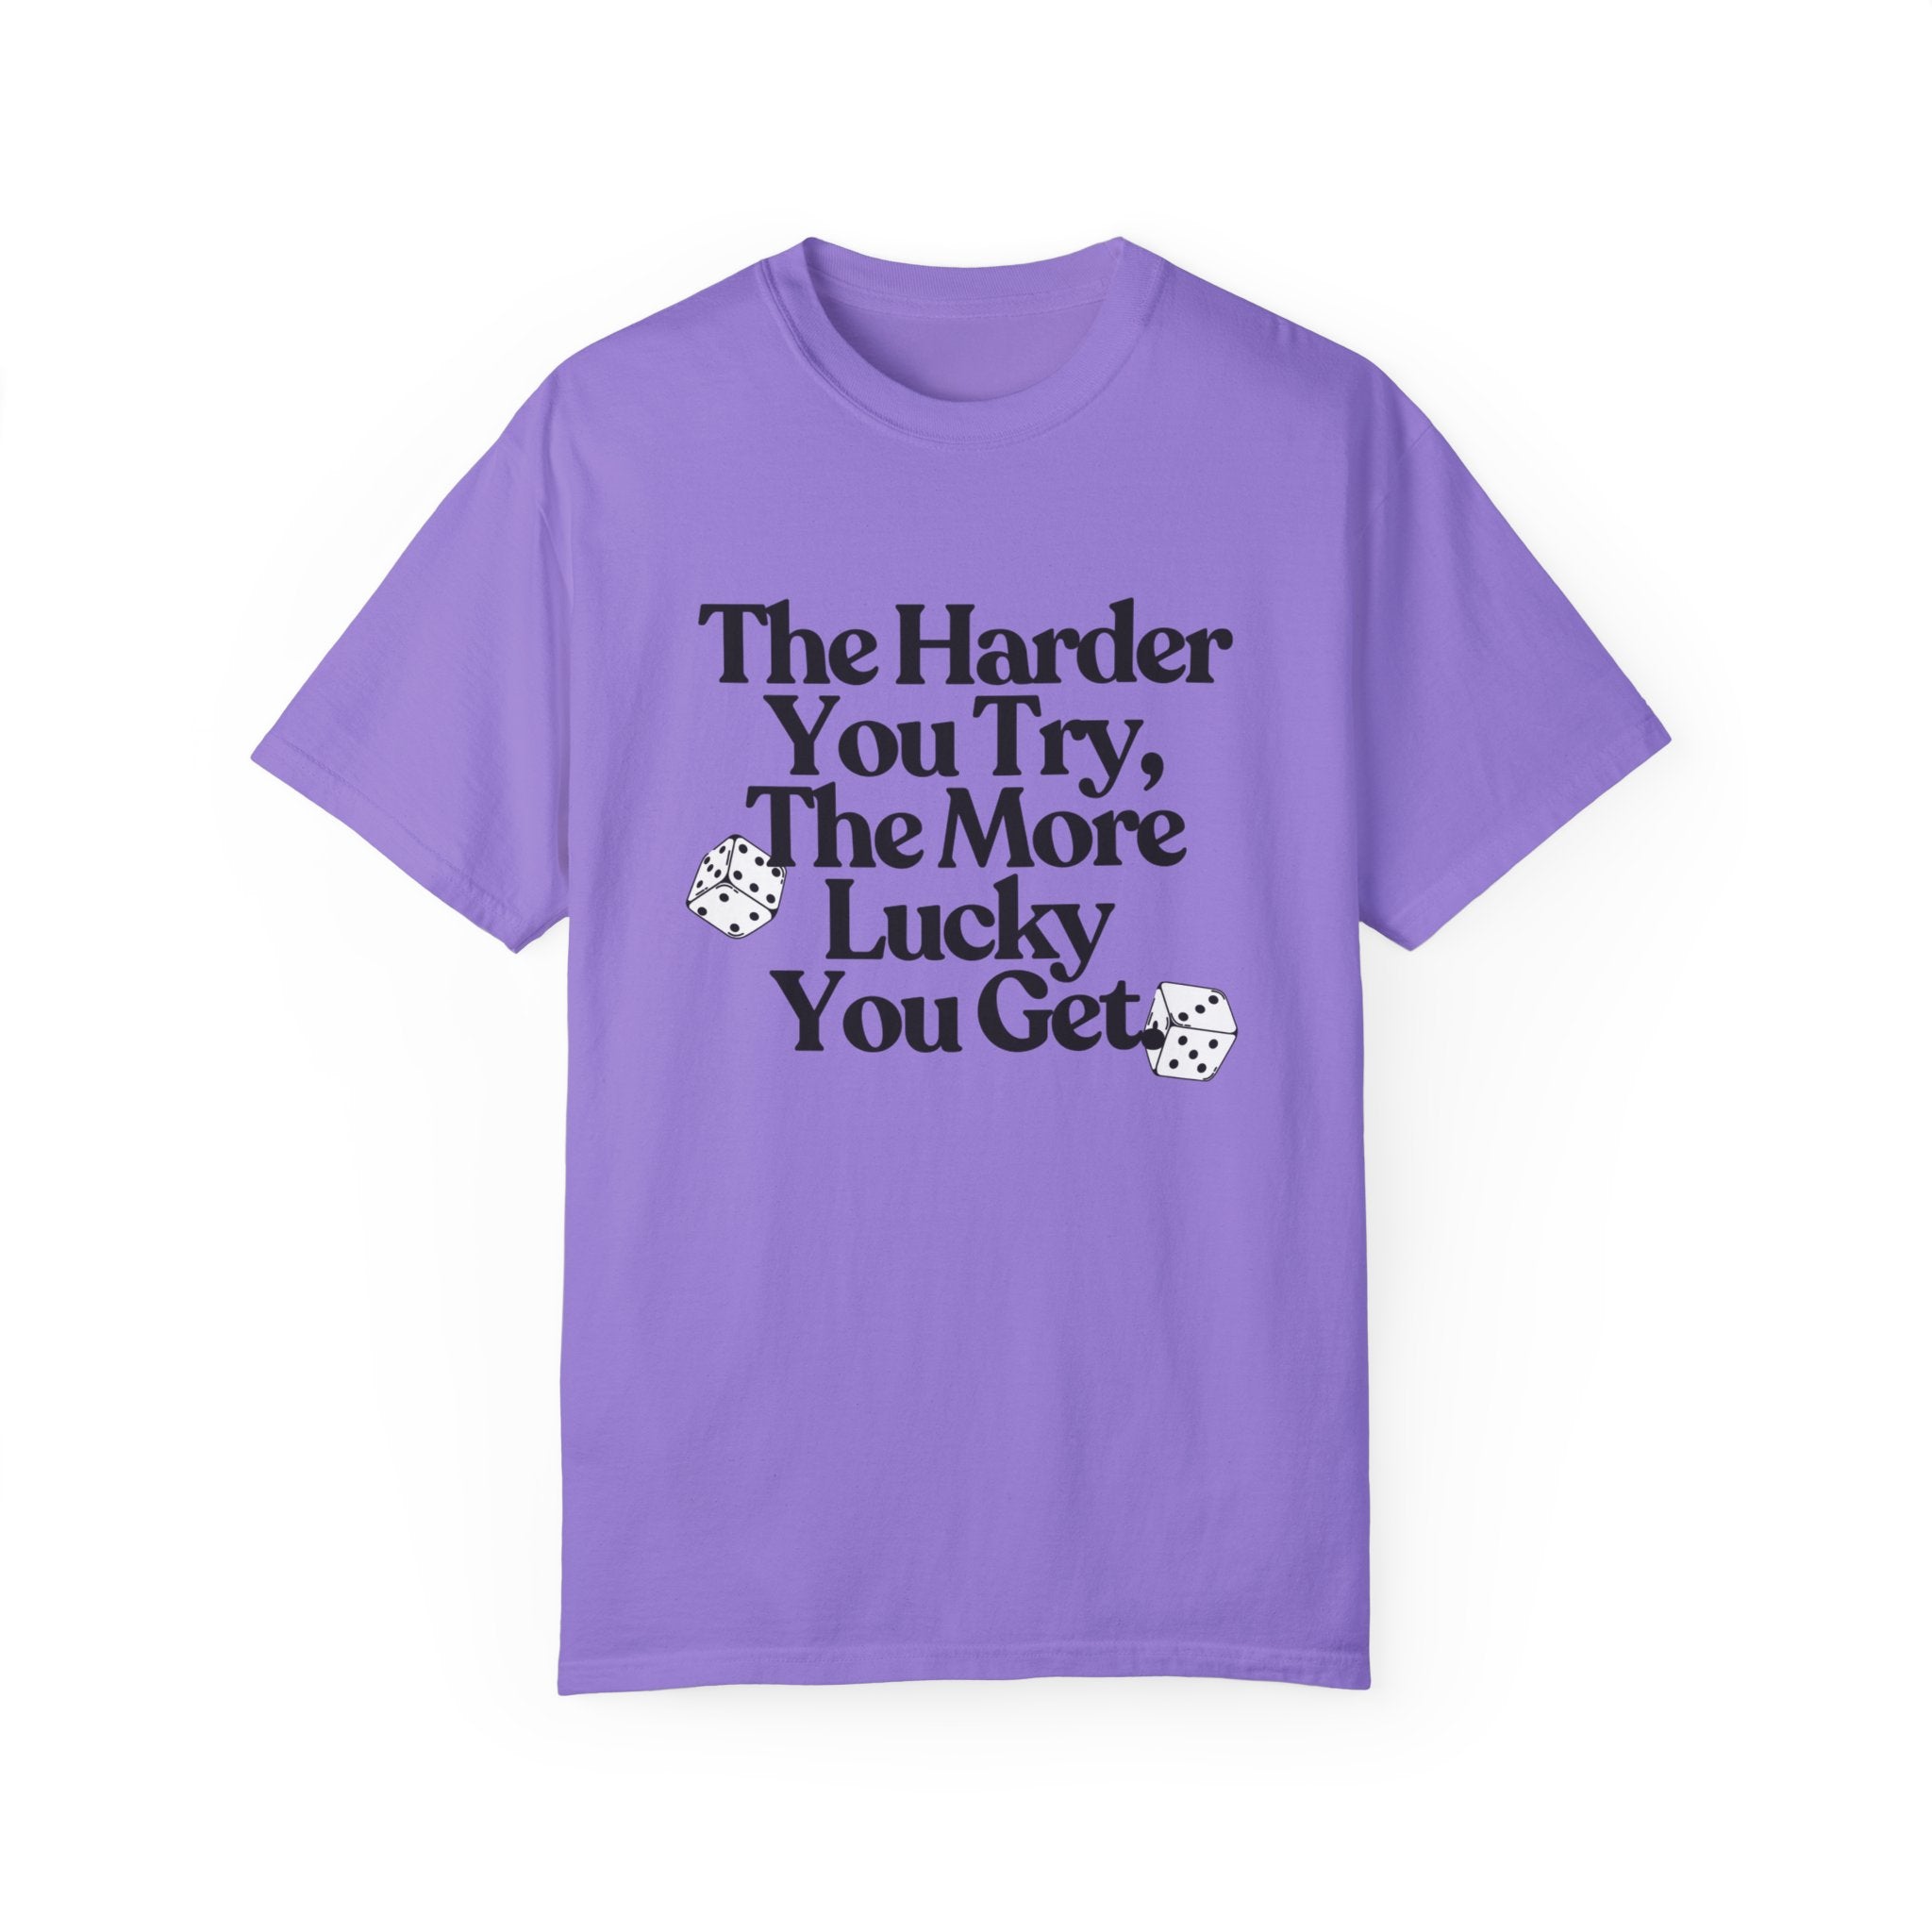 The Luckier You Get Comfort Colors T Shirt